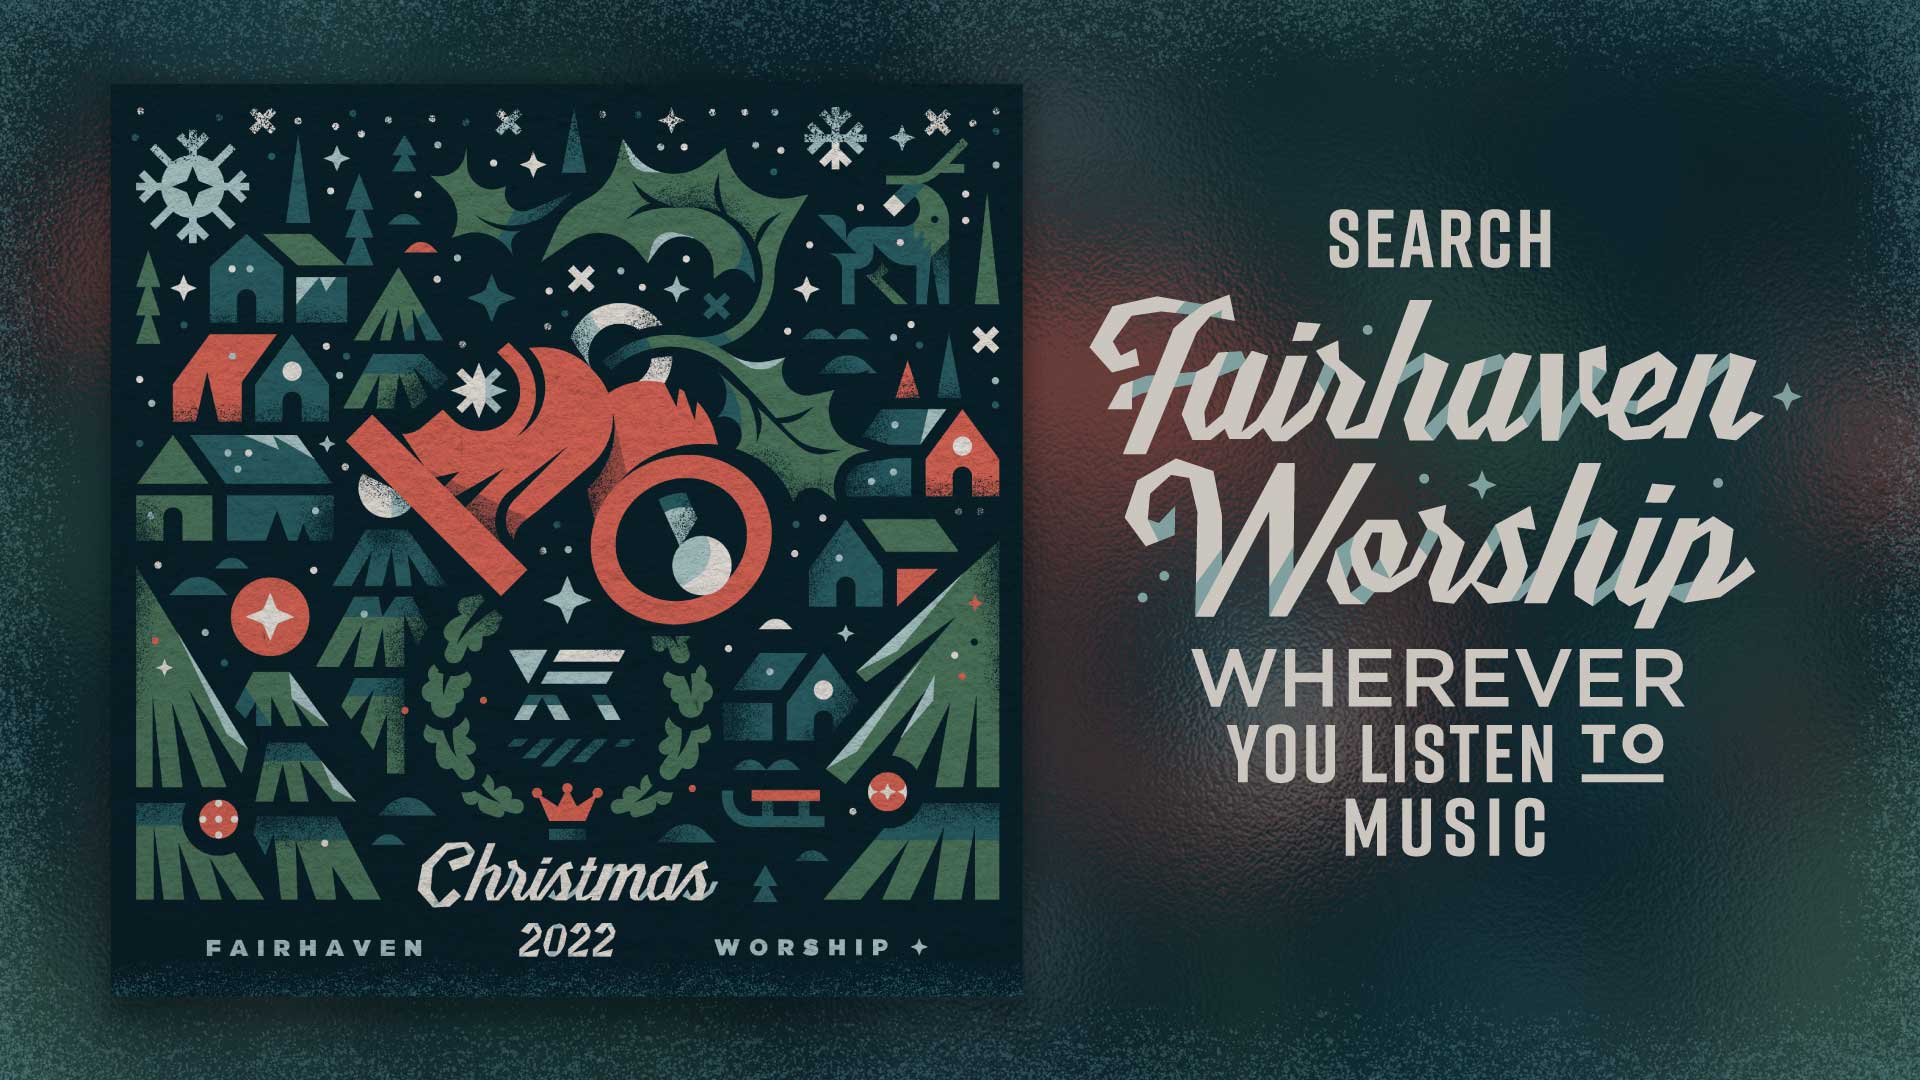 A gift of music for your holiday season